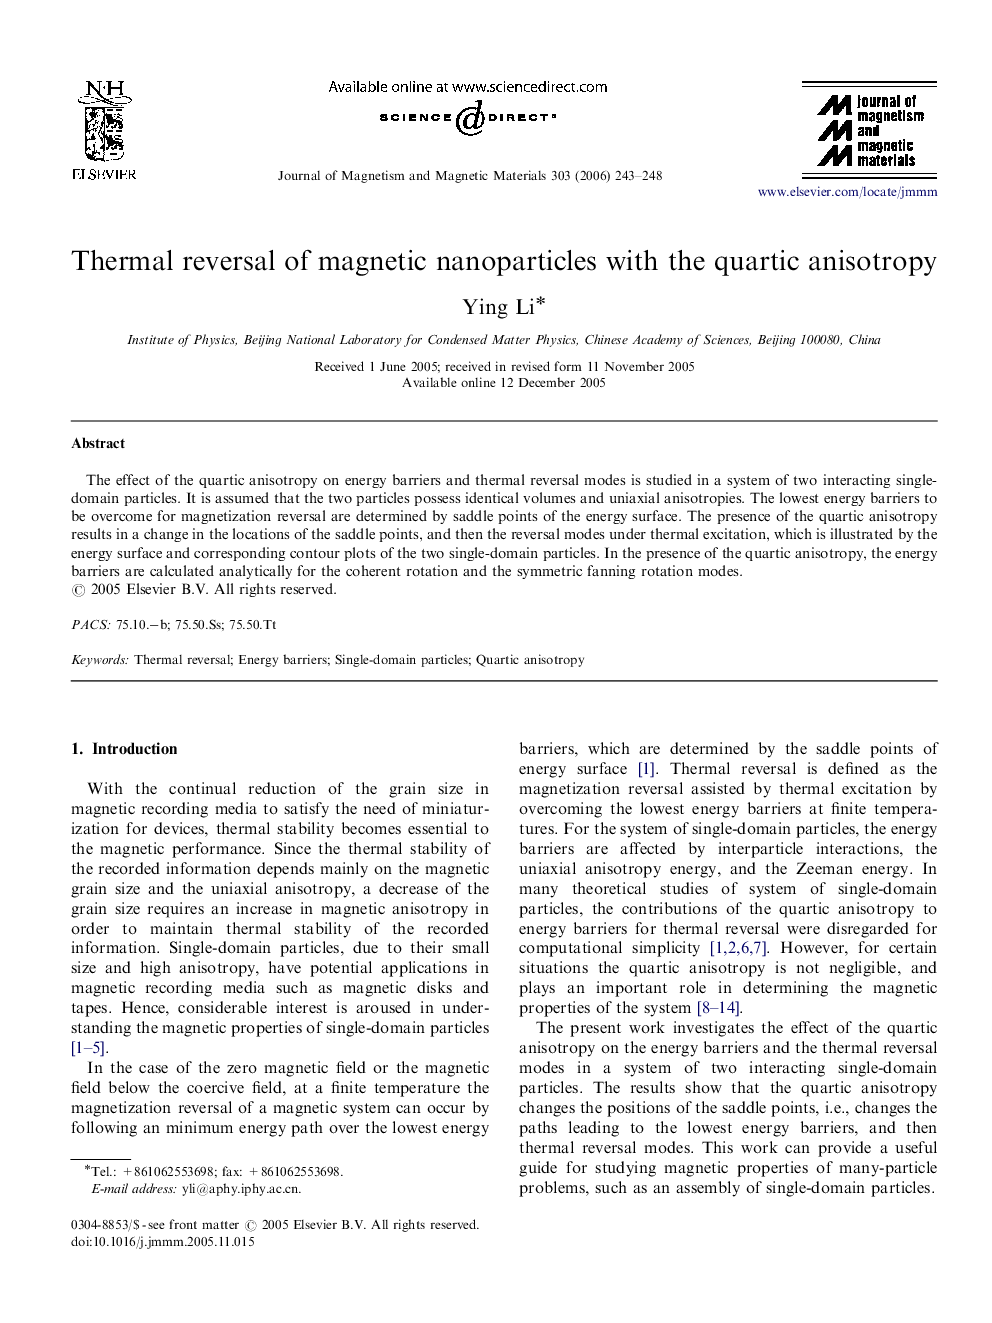 Thermal reversal of magnetic nanoparticles with the quartic anisotropy